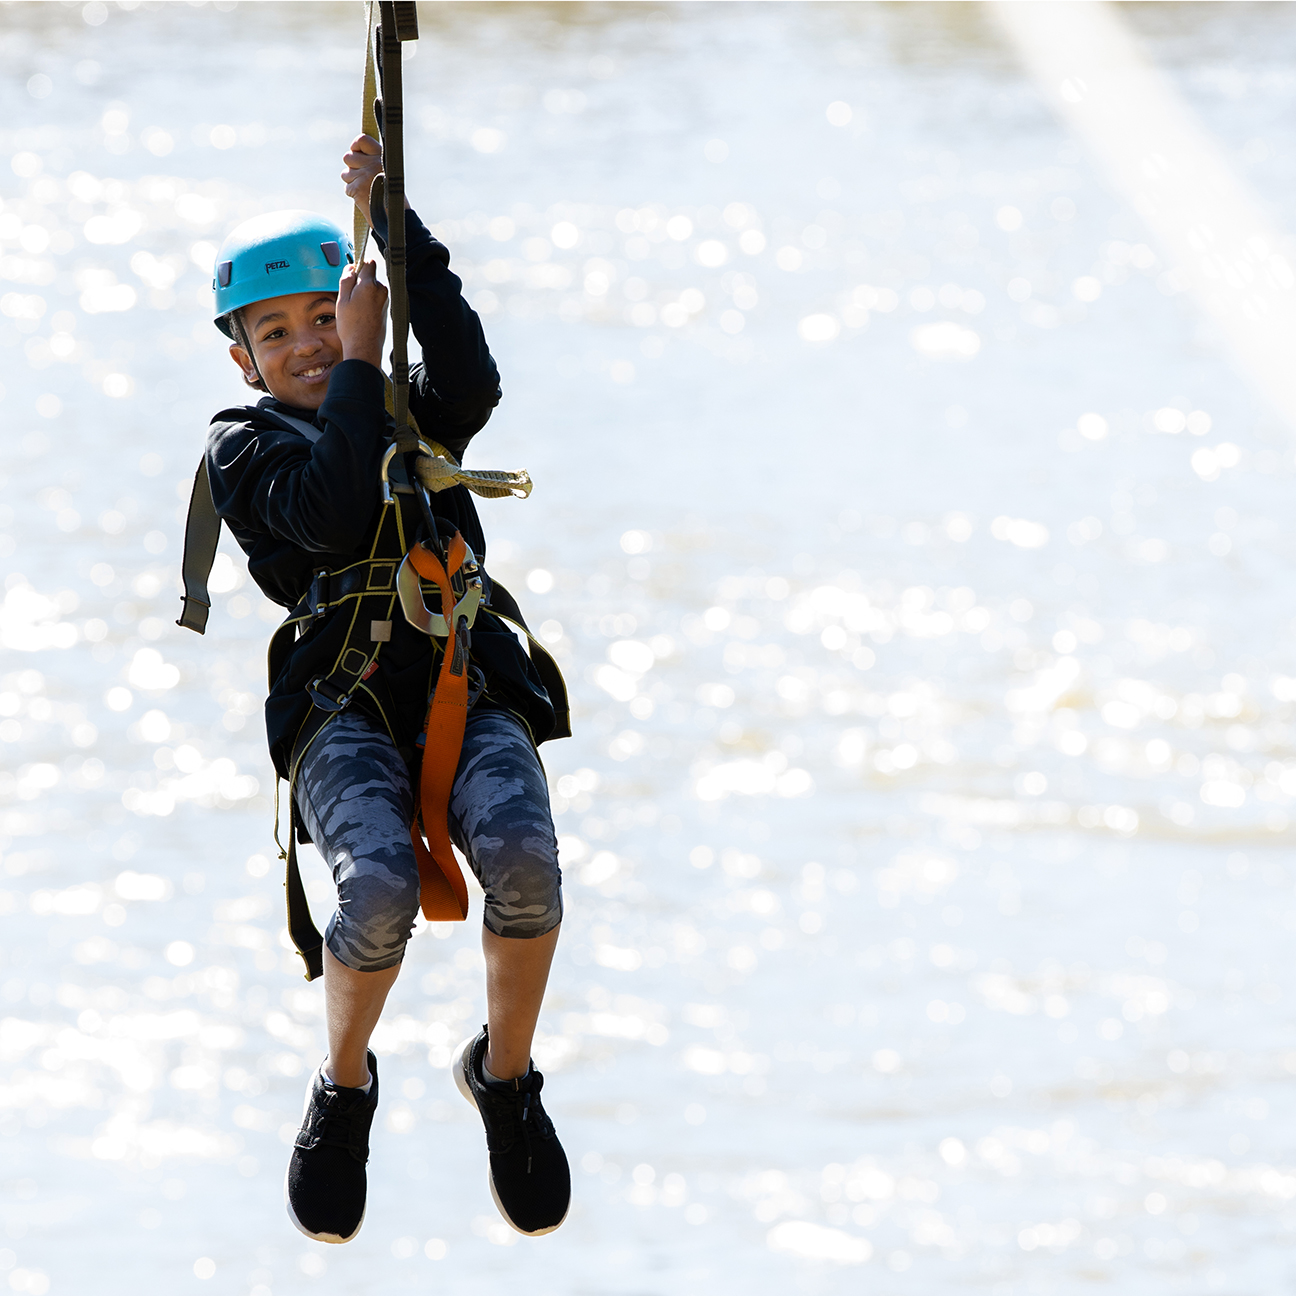 RushSouth zip lining and aerial adventure